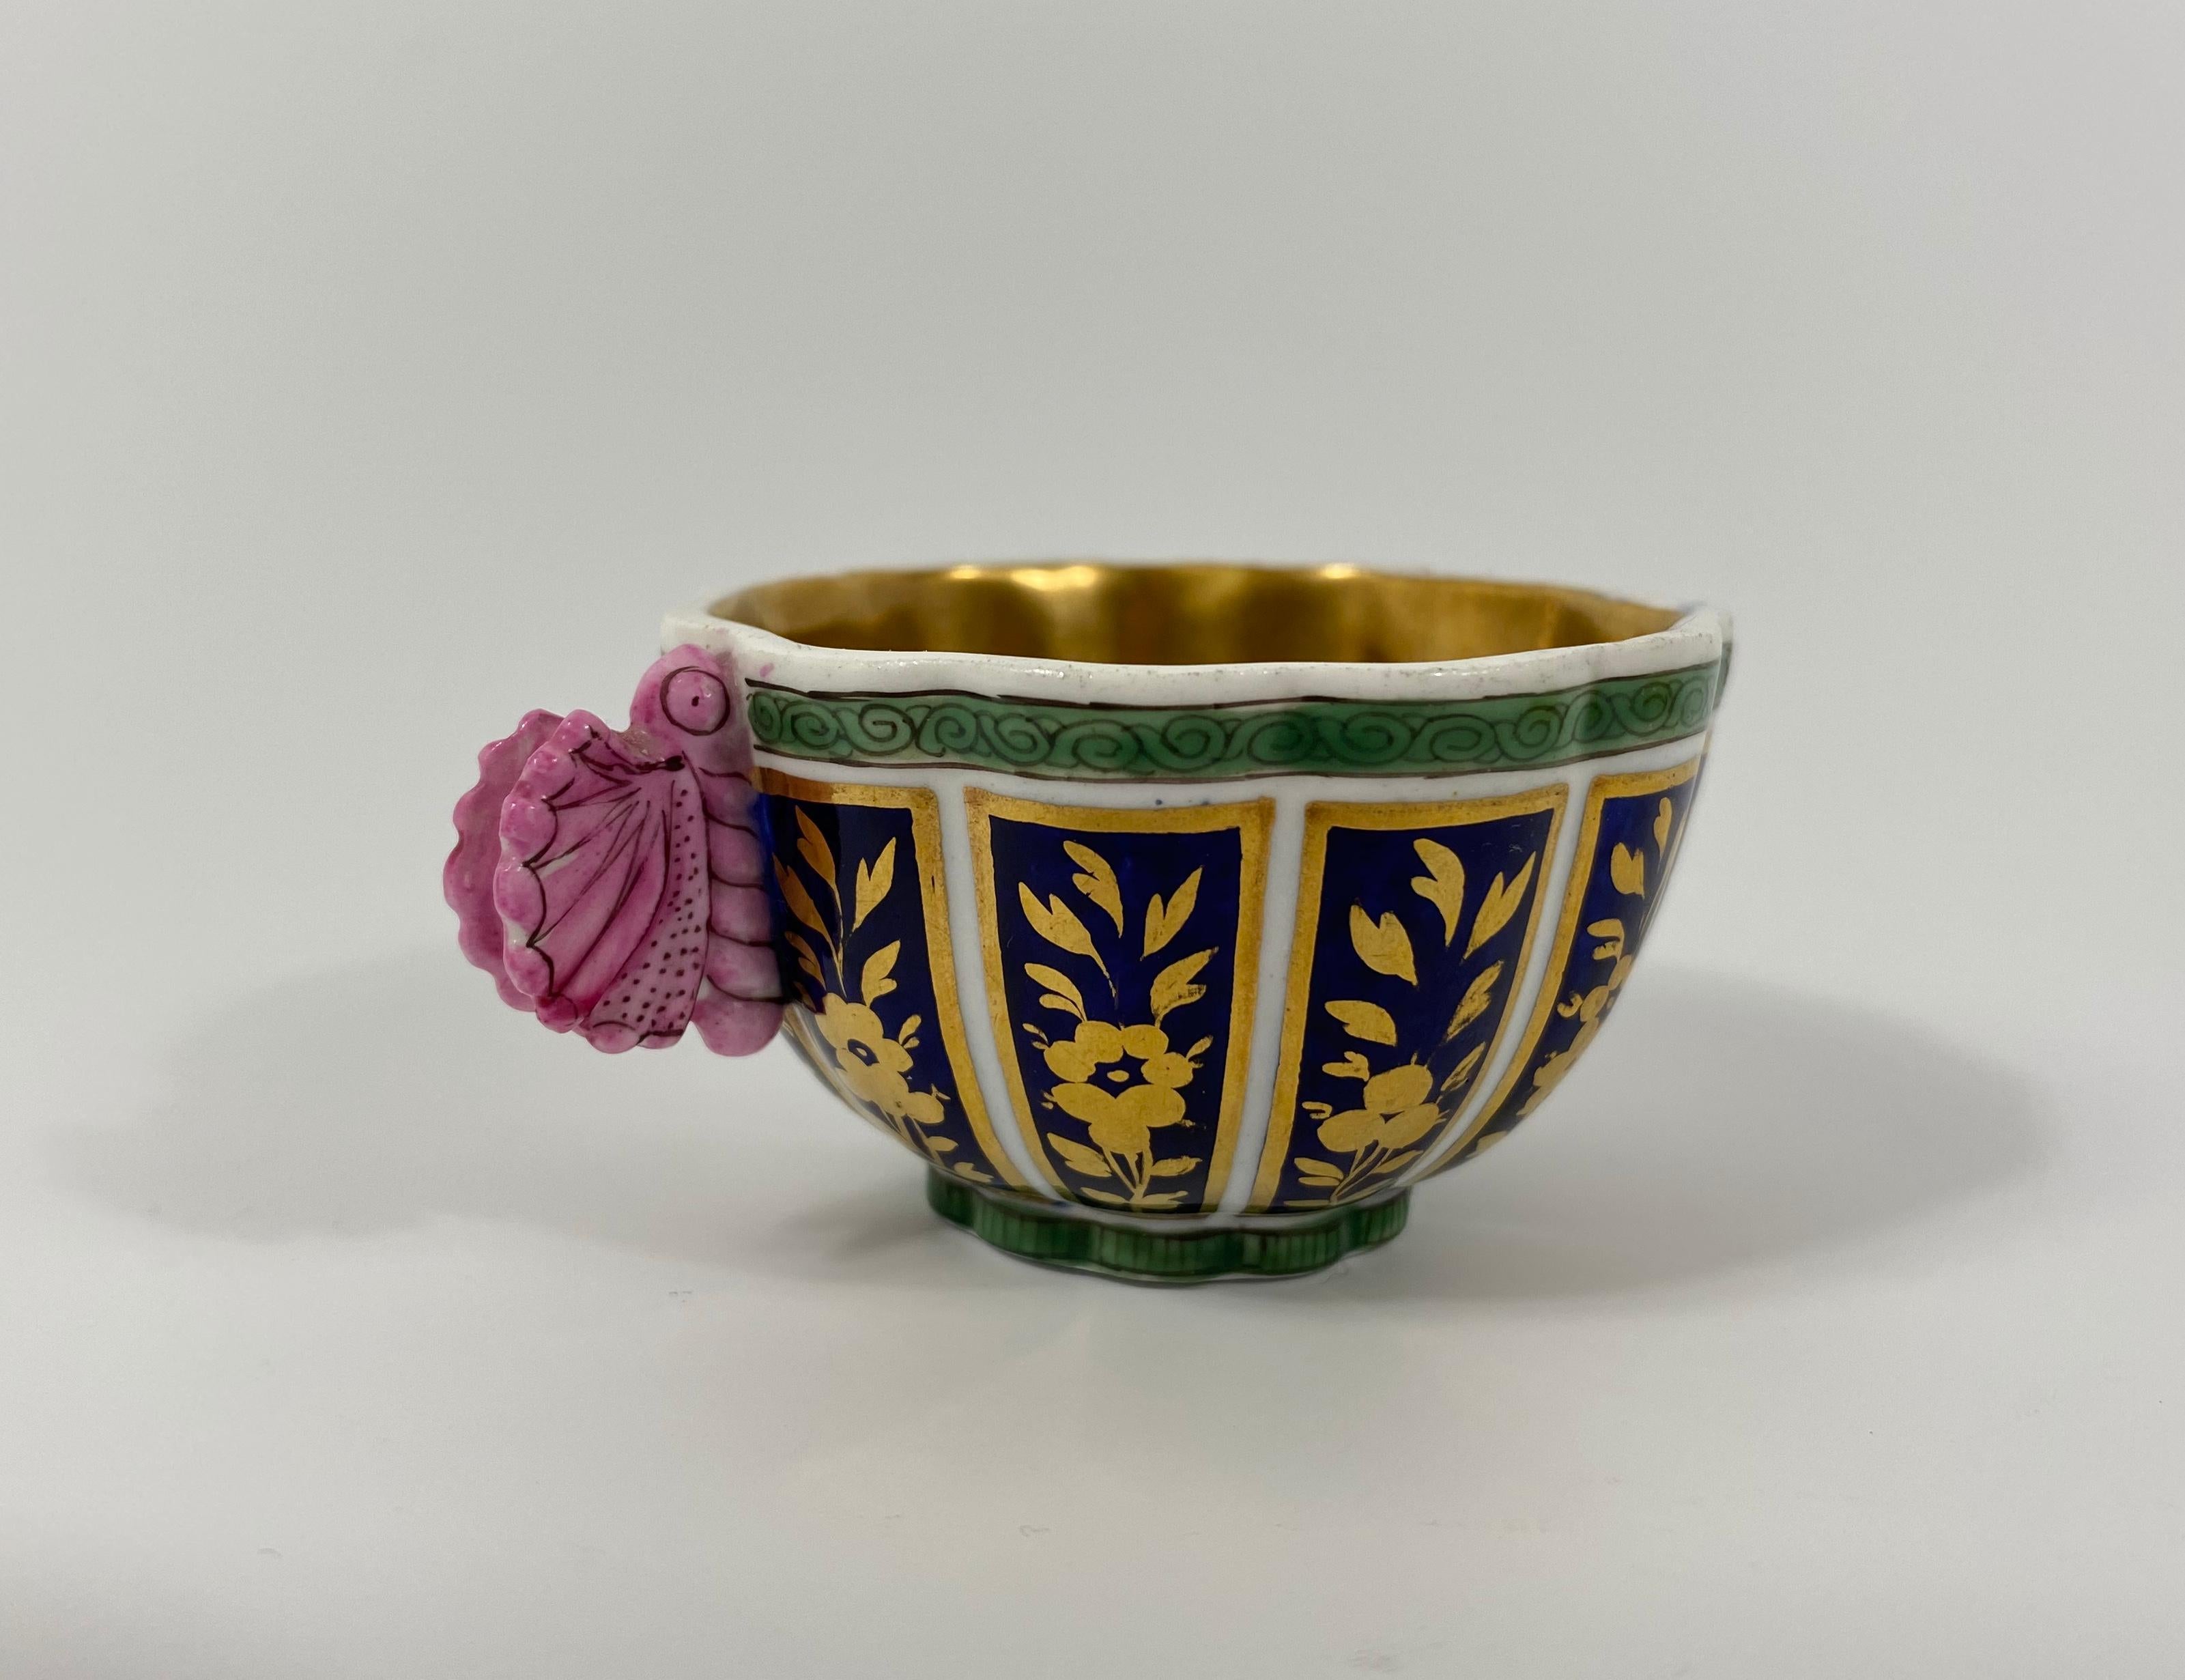 English Spode Porcelain Cup and Saucer, ‘Butterfly’ Handle, circa 1810